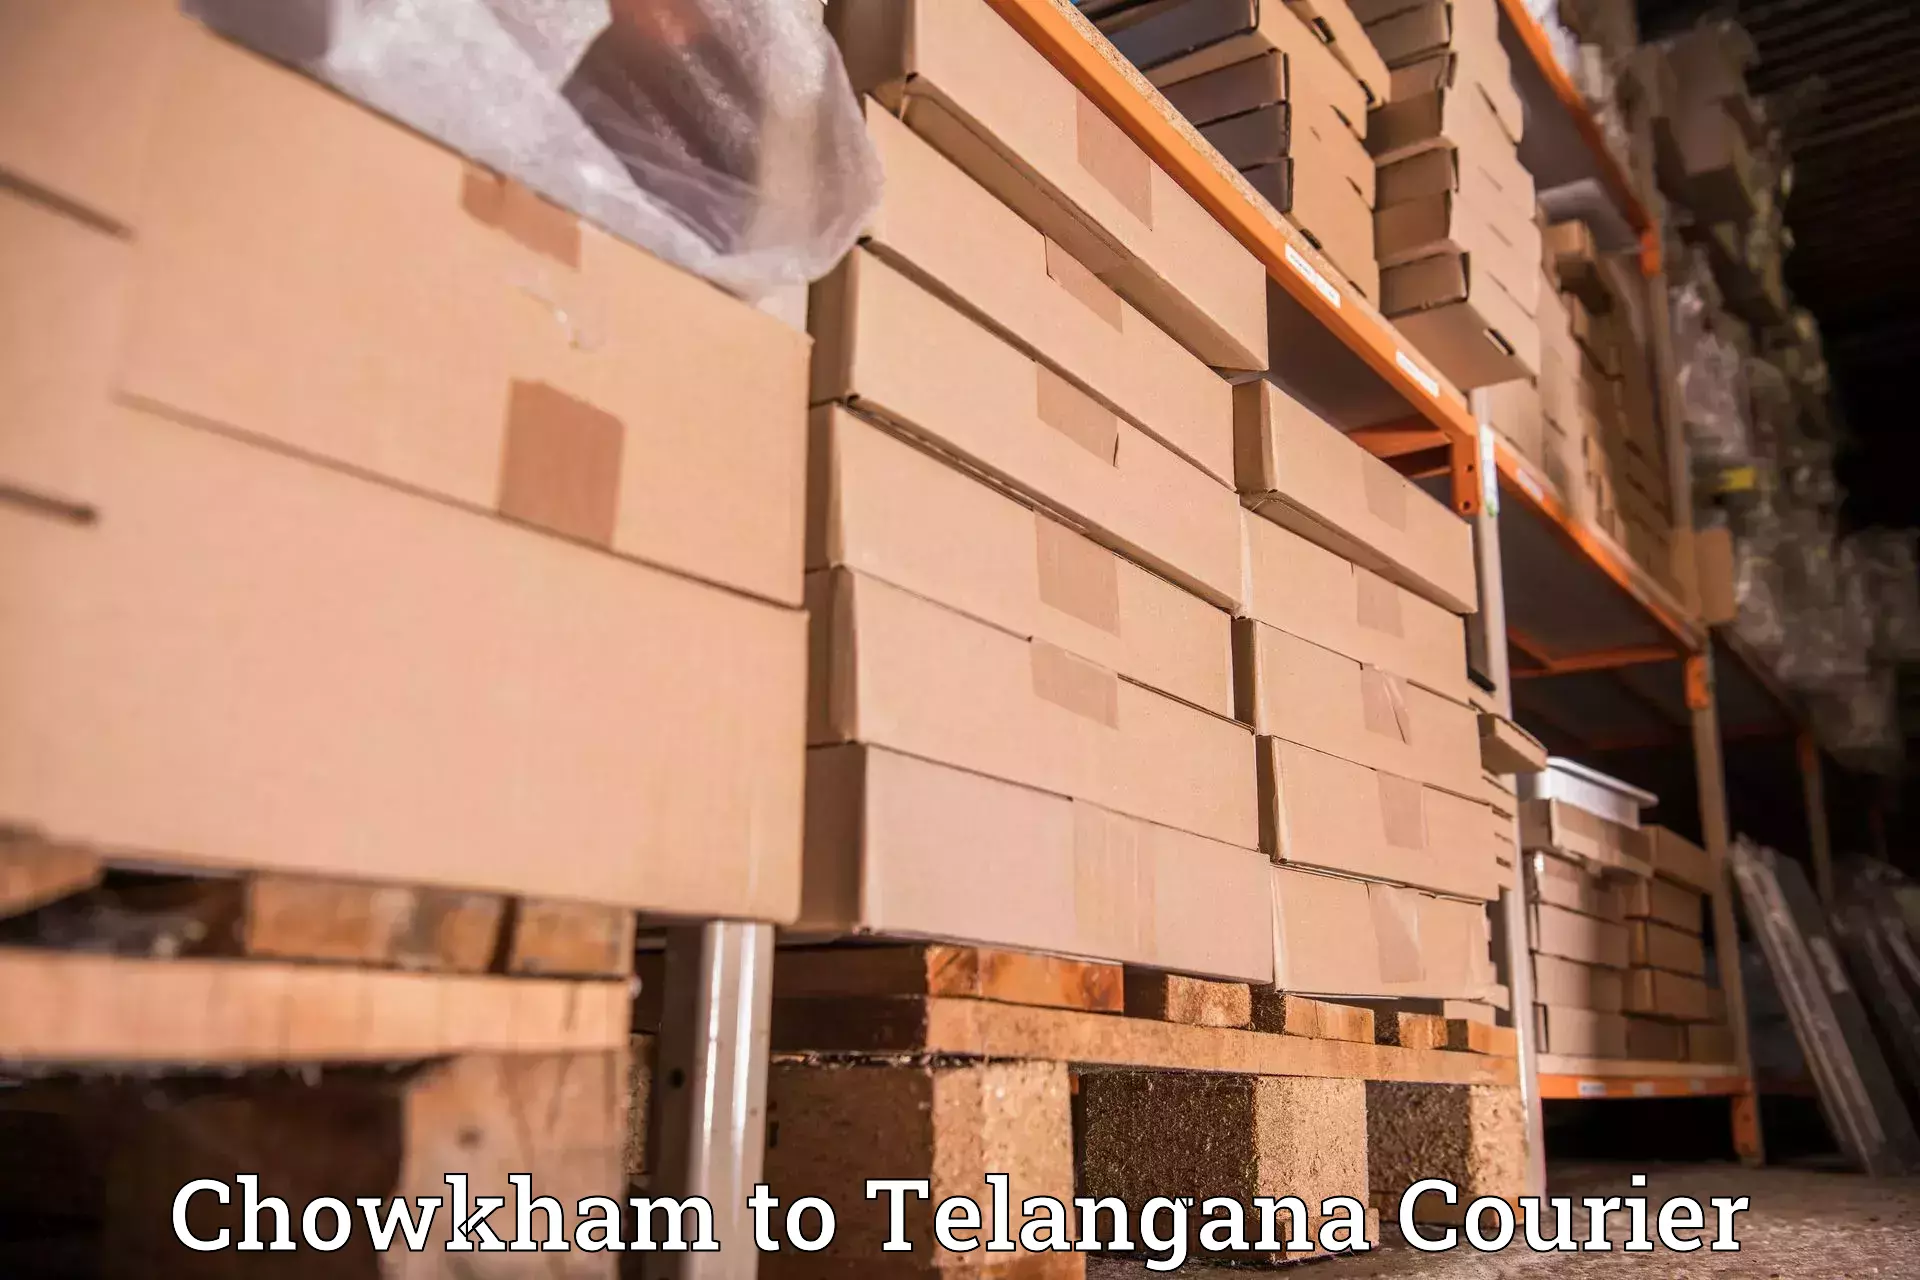 Parcel handling and care Chowkham to Nizamabad